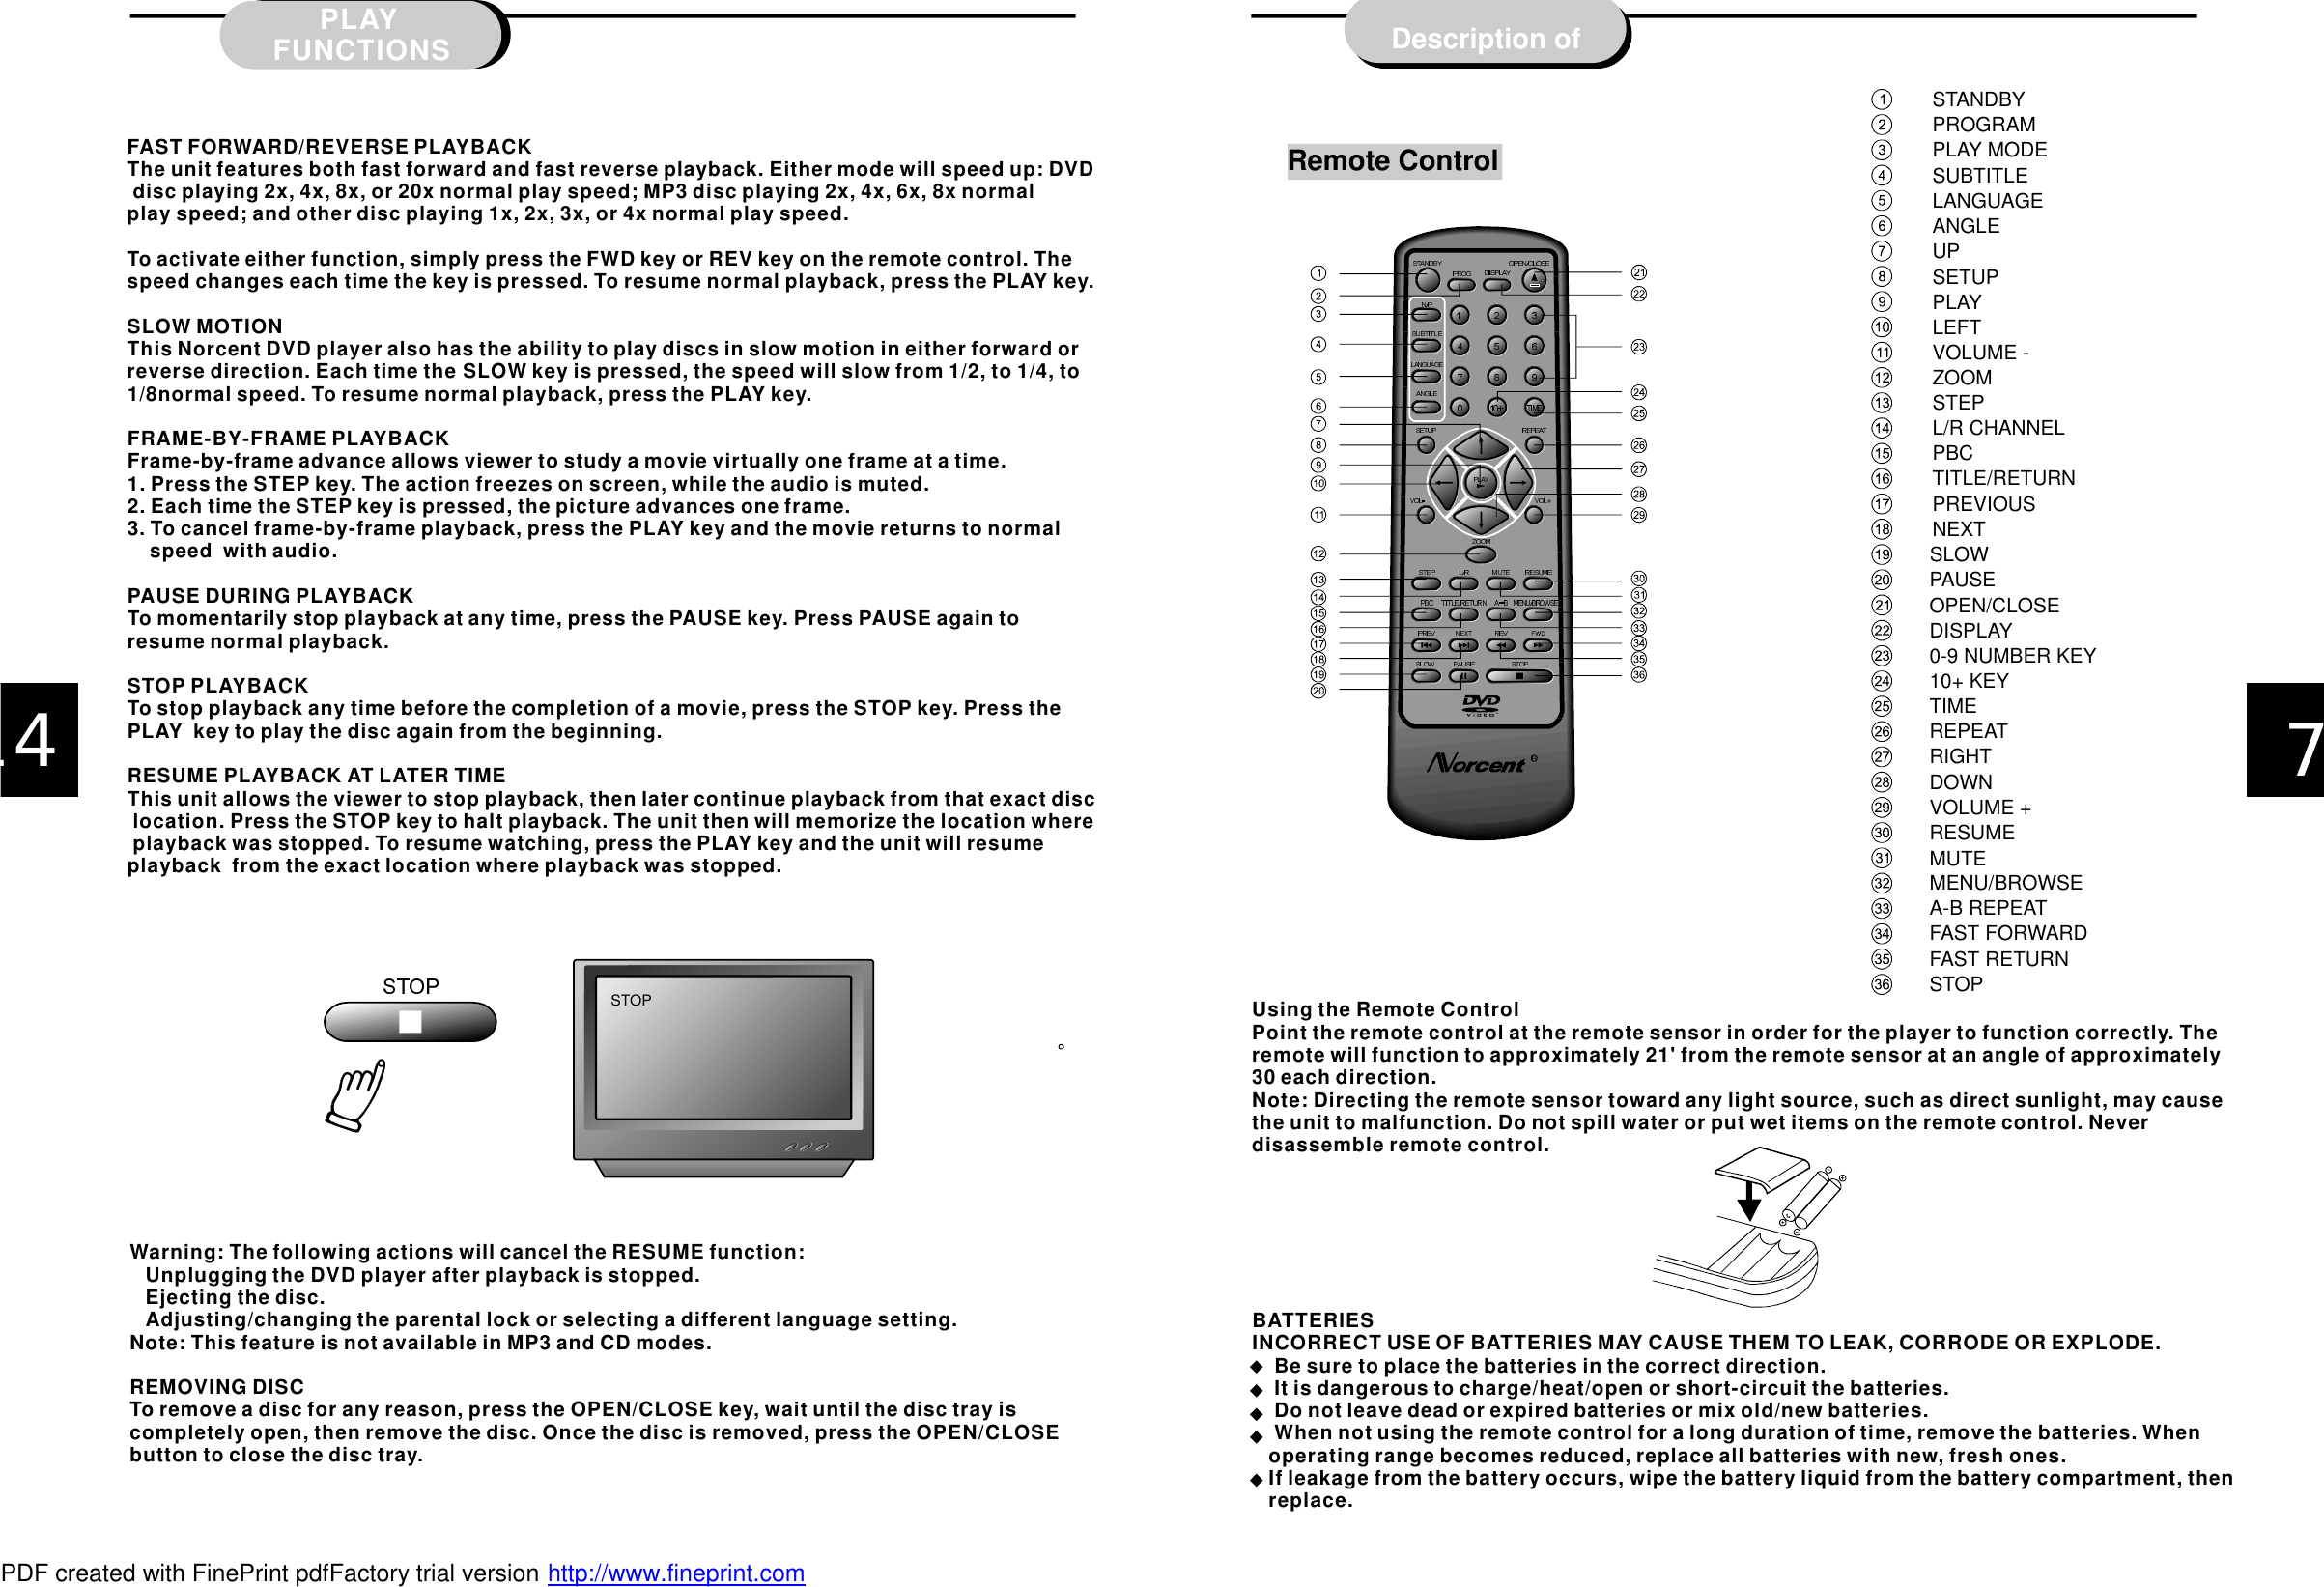 Page 8 of 12 - Norcent-Technologies Norcent-Technologies-Norcent-Dp300-Users-Manual- DP300说明书8.0  Norcent-technologies-norcent-dp300-users-manual